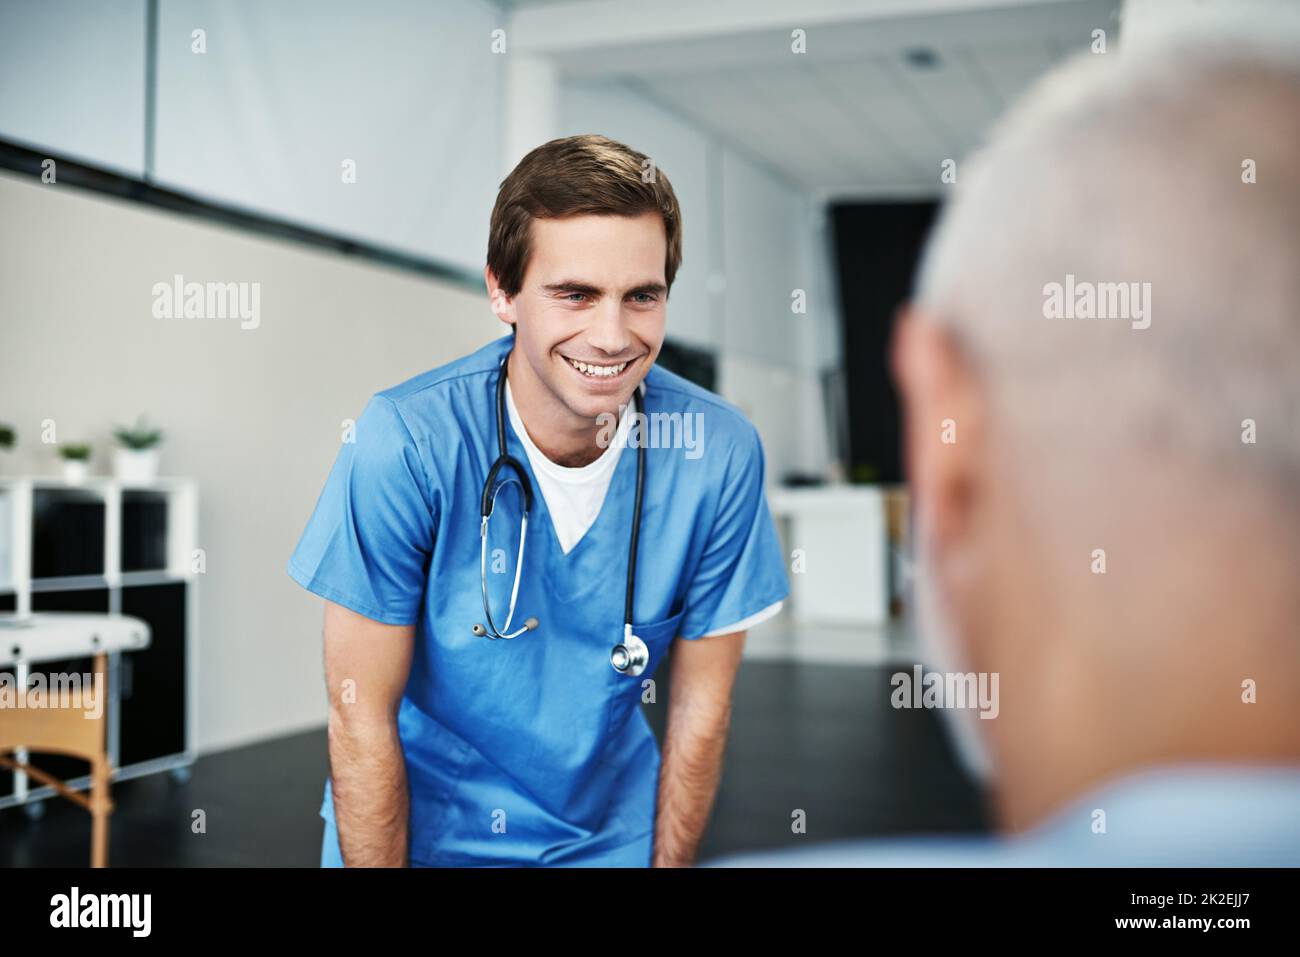 He serves with genuine compassion. Shot of a male nurse caring for a senior patient. Stock Photo